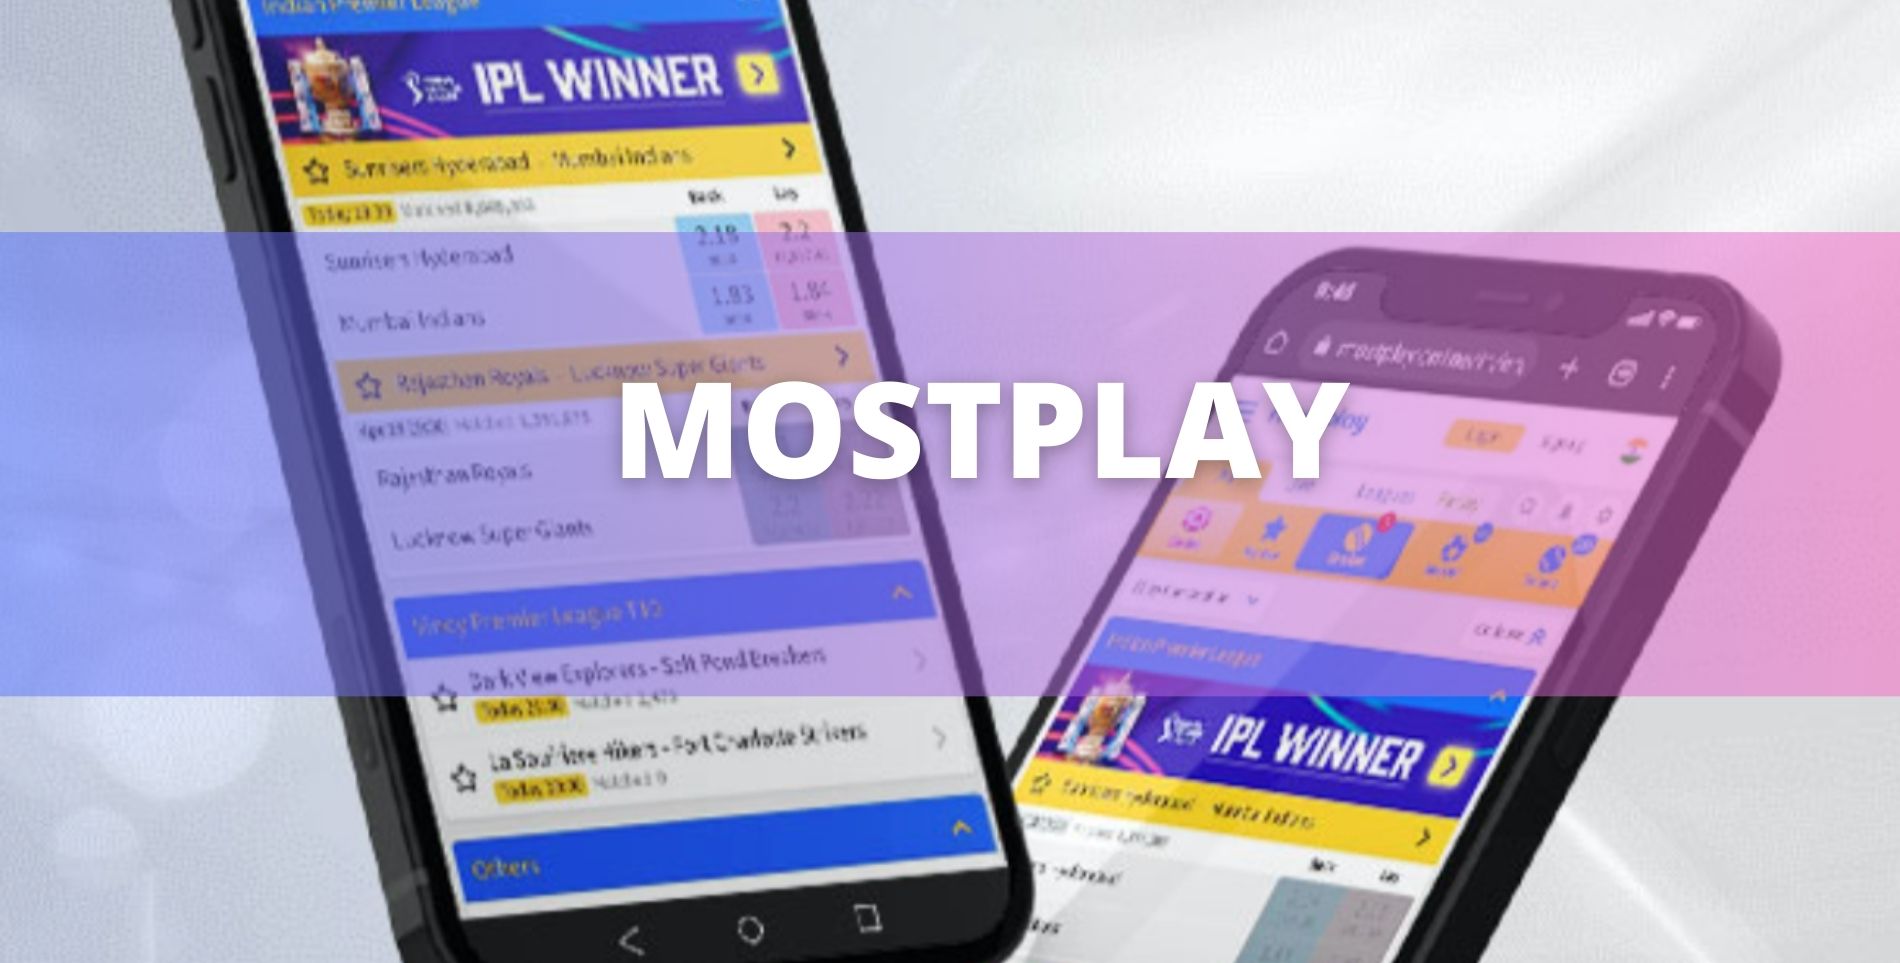 Mostplay Betting and Casino